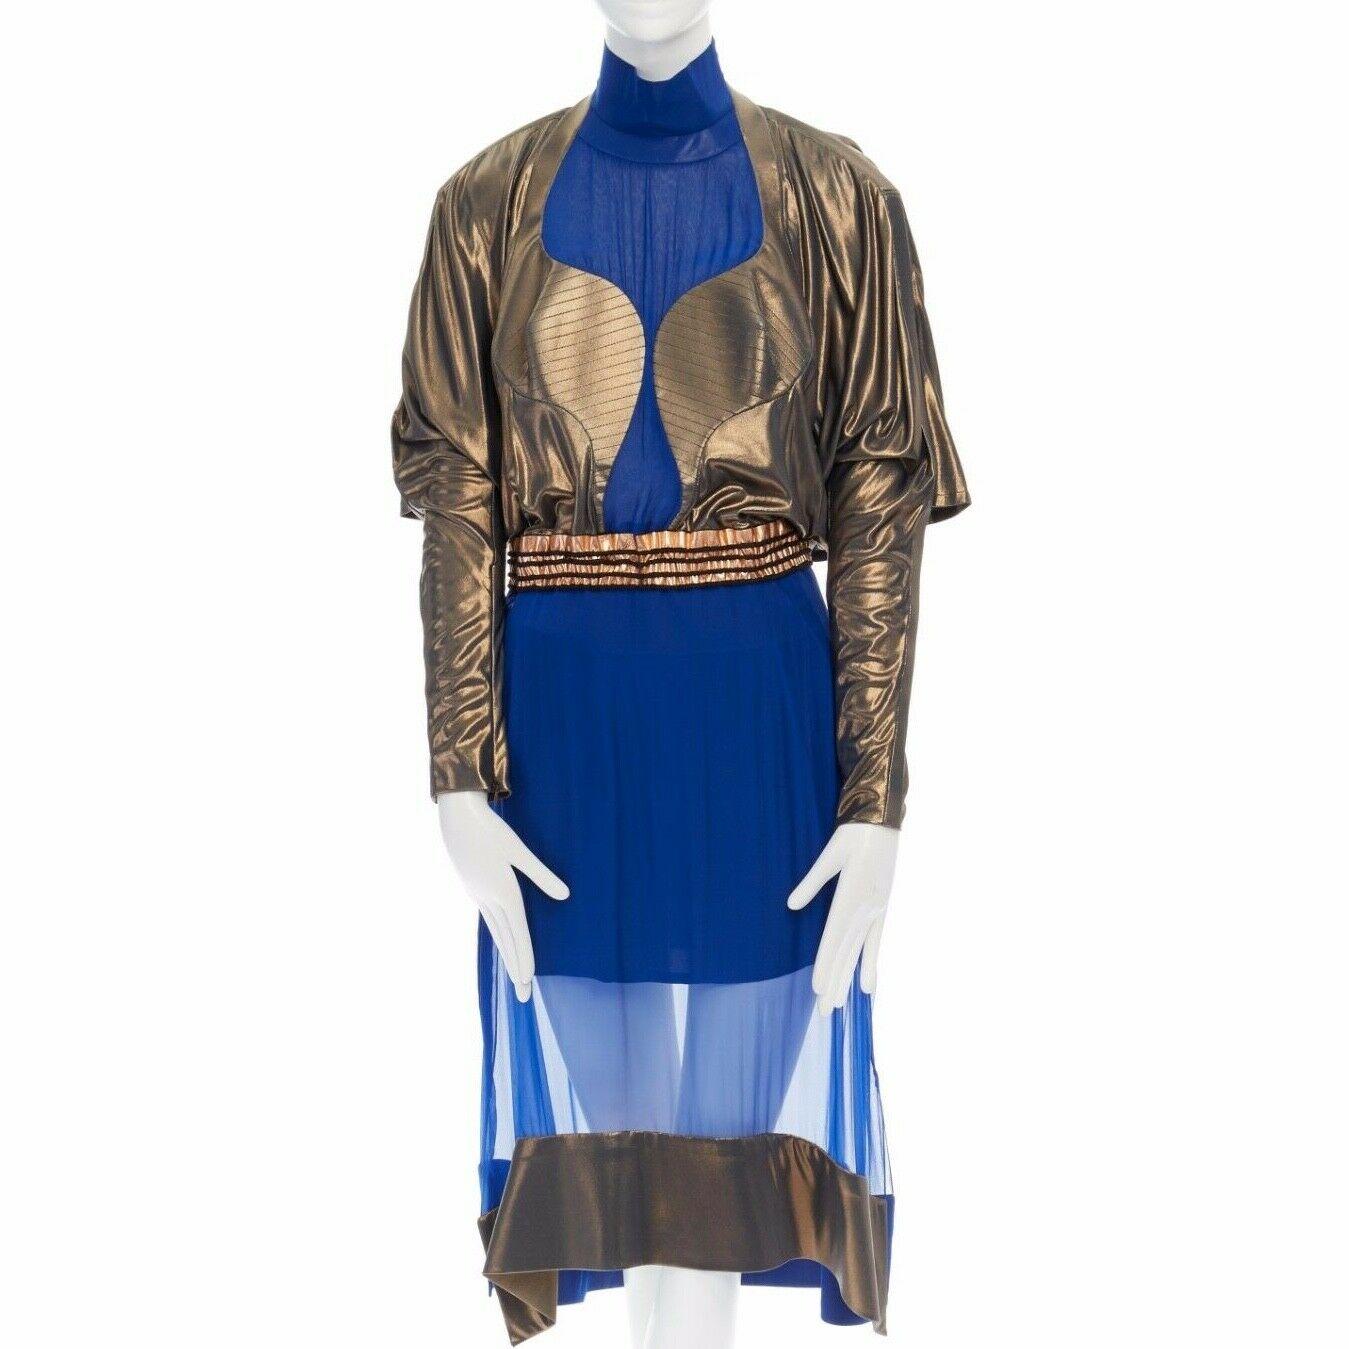 BALENCIAGA by NICHOLAS GHESQUIERE
FROM THE FALL WINTER 2012 RUNWAY 
SILK, RAYON, COTTON, AGNELLO, POLYESTER, POLYURETHANE • BLUE SILK BASE • SCULPTED BUST • MOCK HIGH NECKLINE • CONTOUR METALLIC BUST • SCULPTED STITCHING ON BUST • METALLIC COPPER